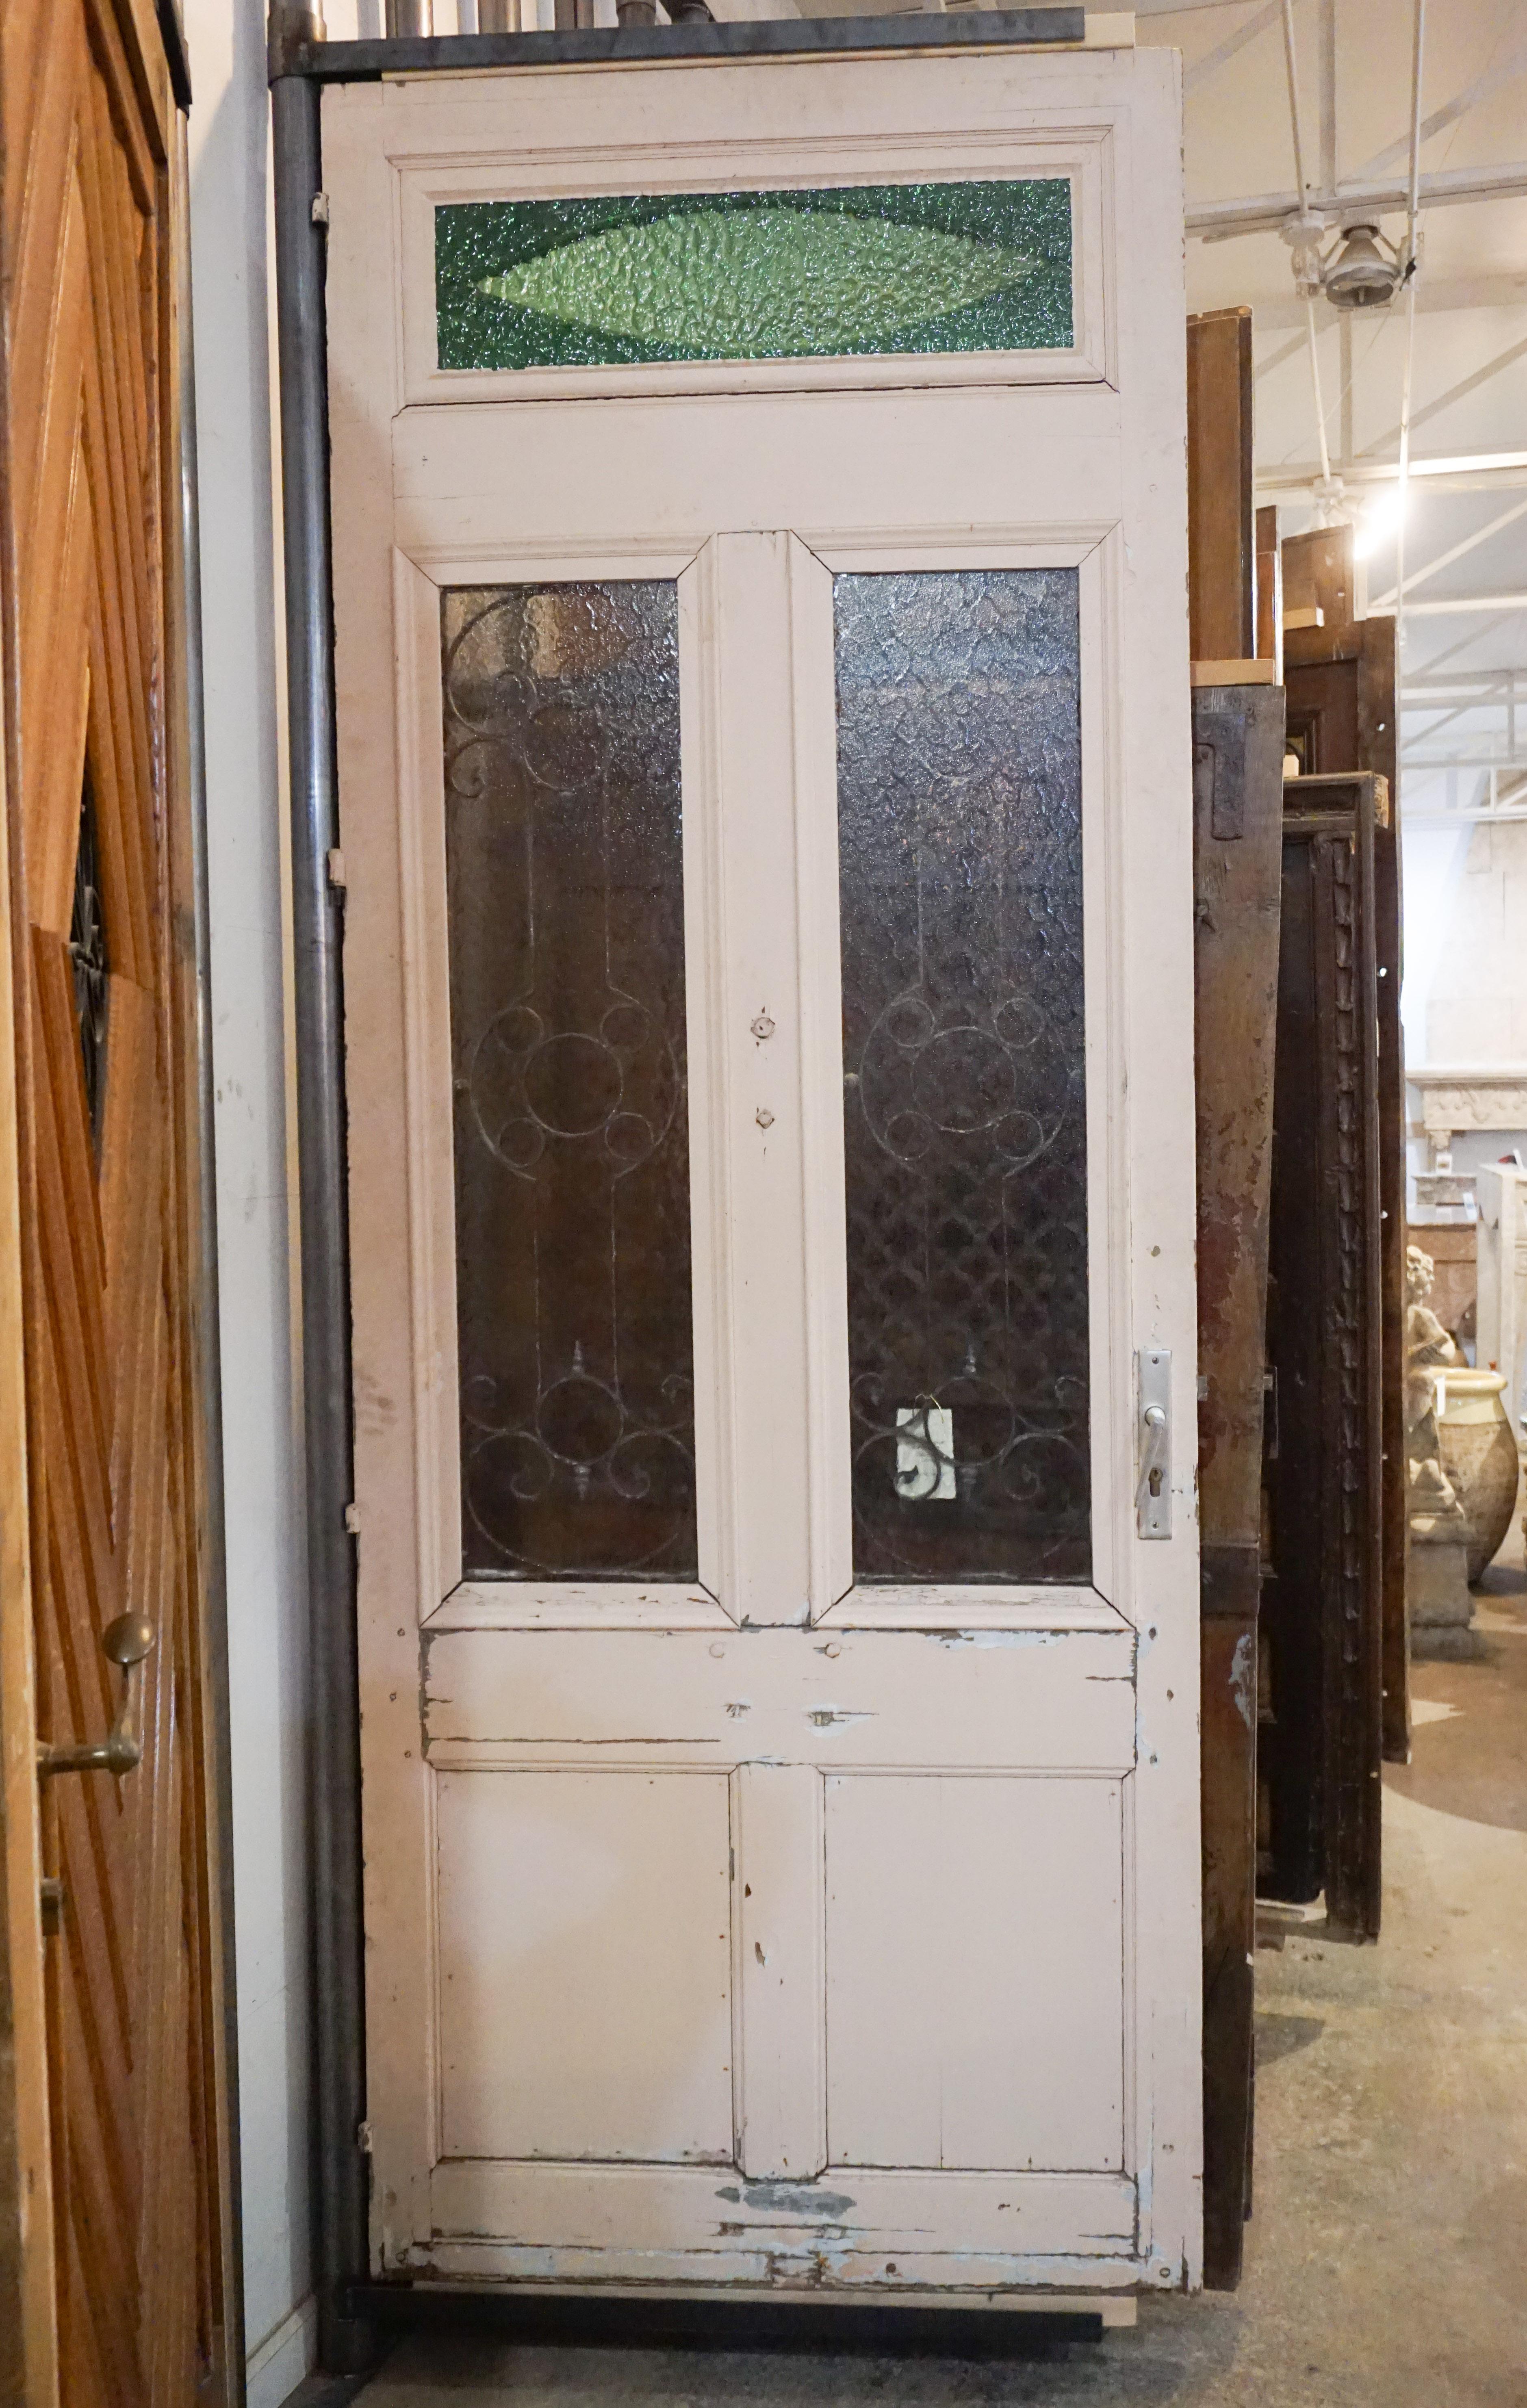 Antique oak, glass and iron work door. Imported from France, circa 1870. This door has tons of character with the hand shaped knocker and green textured window transom.

Measurements: 1.5